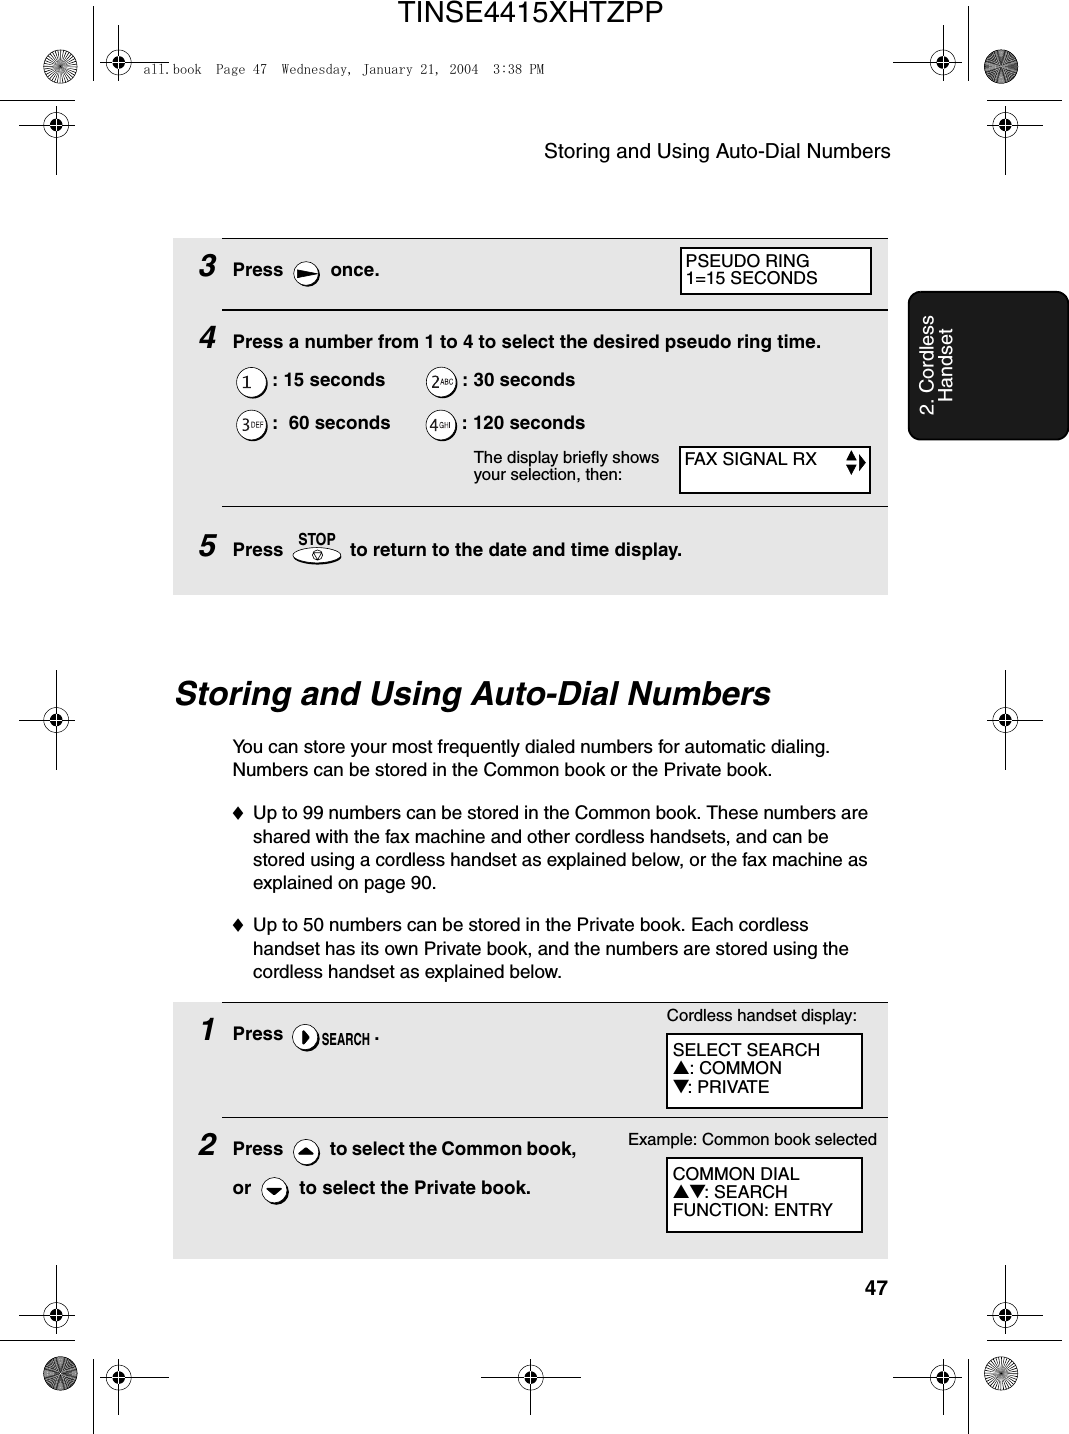 Storing and Using Auto-Dial Numbers472. Cordless HandsetStoring and Using Auto-Dial NumbersYou can store your most frequently dialed numbers for automatic dialing. Numbers can be stored in the Common book or the Private book. ♦Up to 99 numbers can be stored in the Common book. These numbers are shared with the fax machine and other cordless handsets, and can be stored using a cordless handset as explained below, or the fax machine as explained on page 90. ♦Up to 50 numbers can be stored in the Private book. Each cordless handset has its own Private book, and the numbers are stored using the cordless handset as explained below.1Press .2Press   to select the Common book, or   to select the Private book.SEARCHCordless handset display:SELECT SEARCH▲: COMMON▼: PRIVATECOMMON DIAL▲▼: SEARCHFUNCTION: ENTRYExample: Common book selected3Press  once.4Press a number from 1 to 4 to select the desired pseudo ring time.: 15 seconds        : 30 seconds:  60 seconds       : 120 seconds5Press   to return to the date and time display.STOPFAX SIGNAL RXPSEUDO RING1=15 SECONDSThe display briefly shows your selection, then:all.book  Page 47  Wednesday, January 21, 2004  3:38 PMTINSE4415XHTZPP